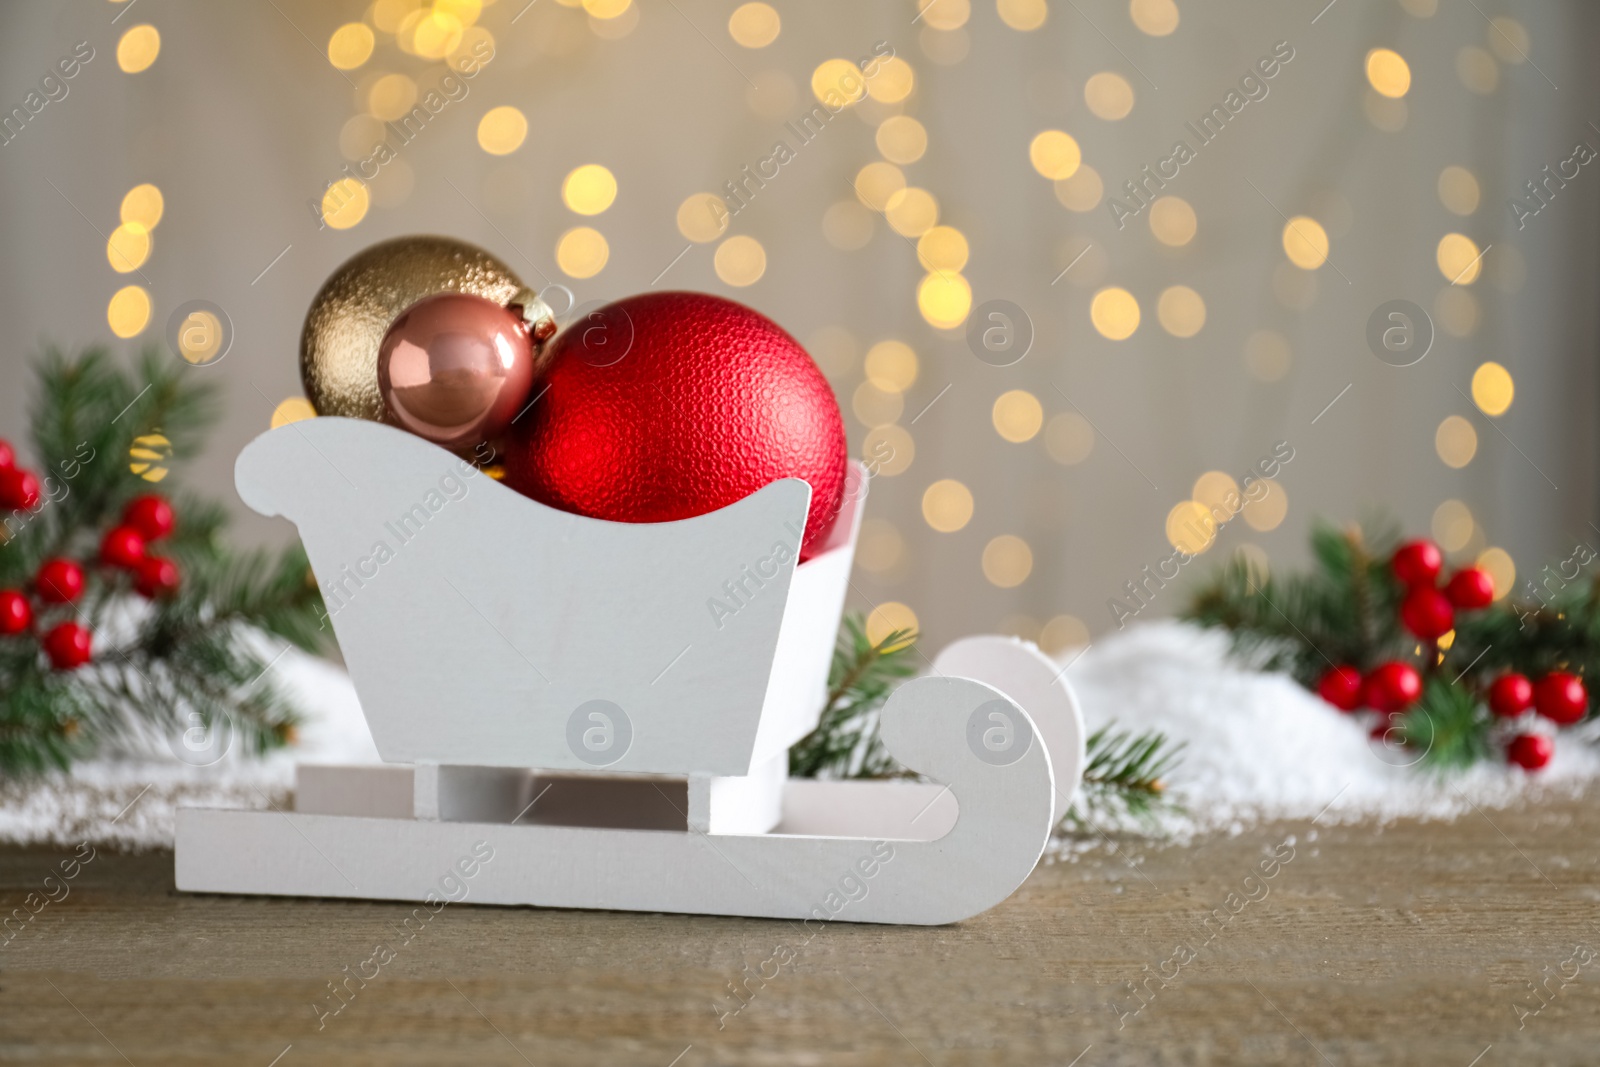 Photo of Sleigh with Christmas decorations on wooden table against blurred lights